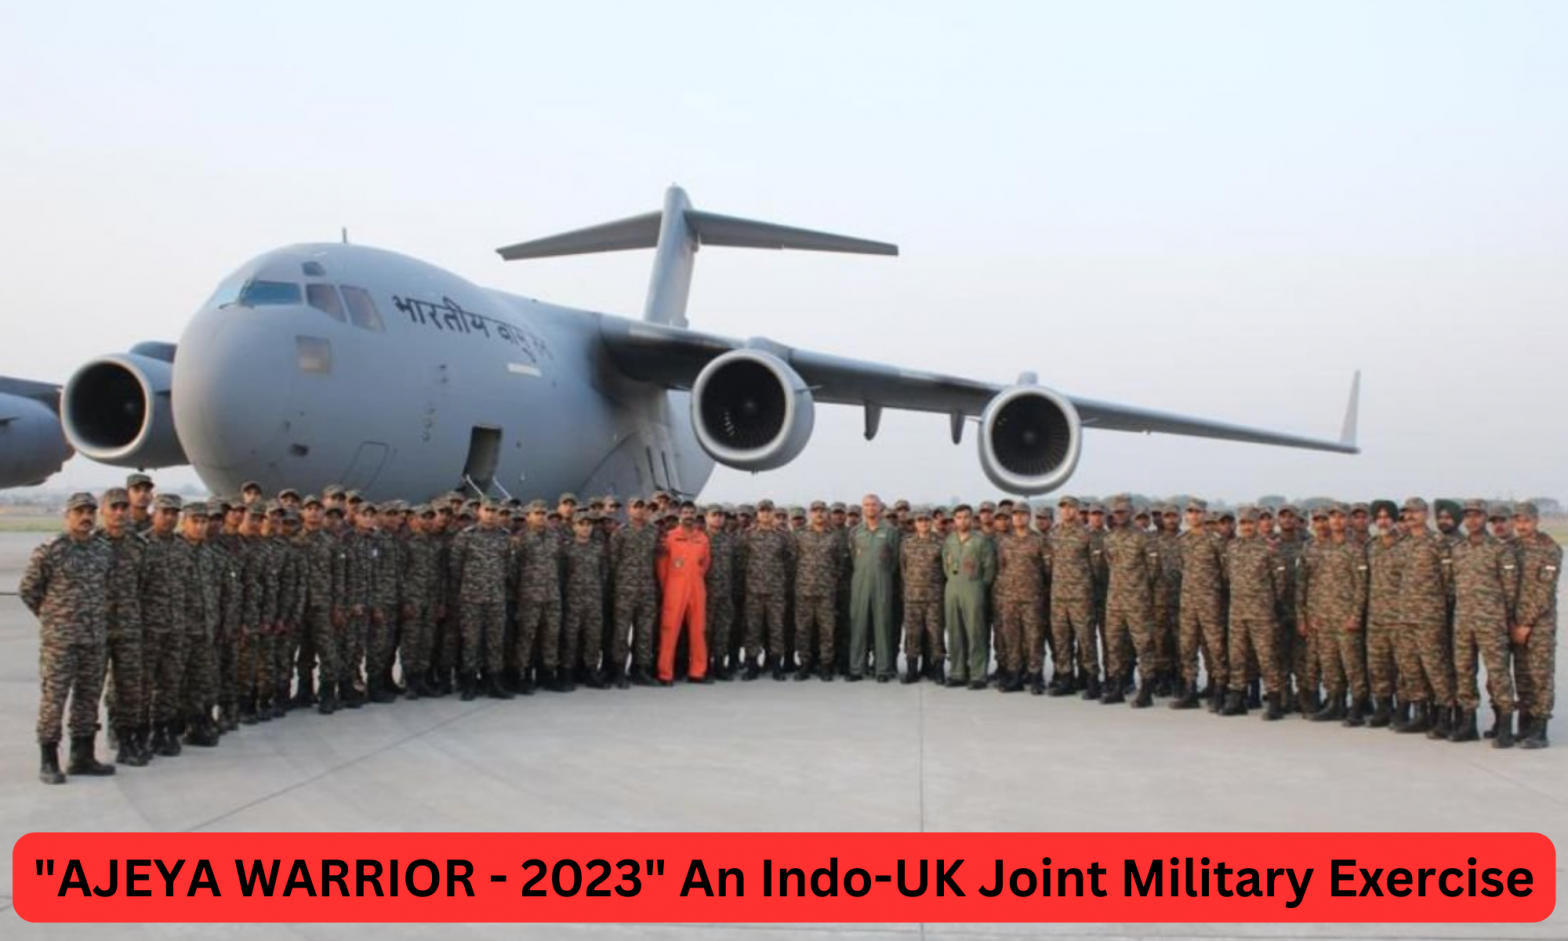 "AJEYA WARRIOR - 2023" An Indo-UK Joint Military Exercise